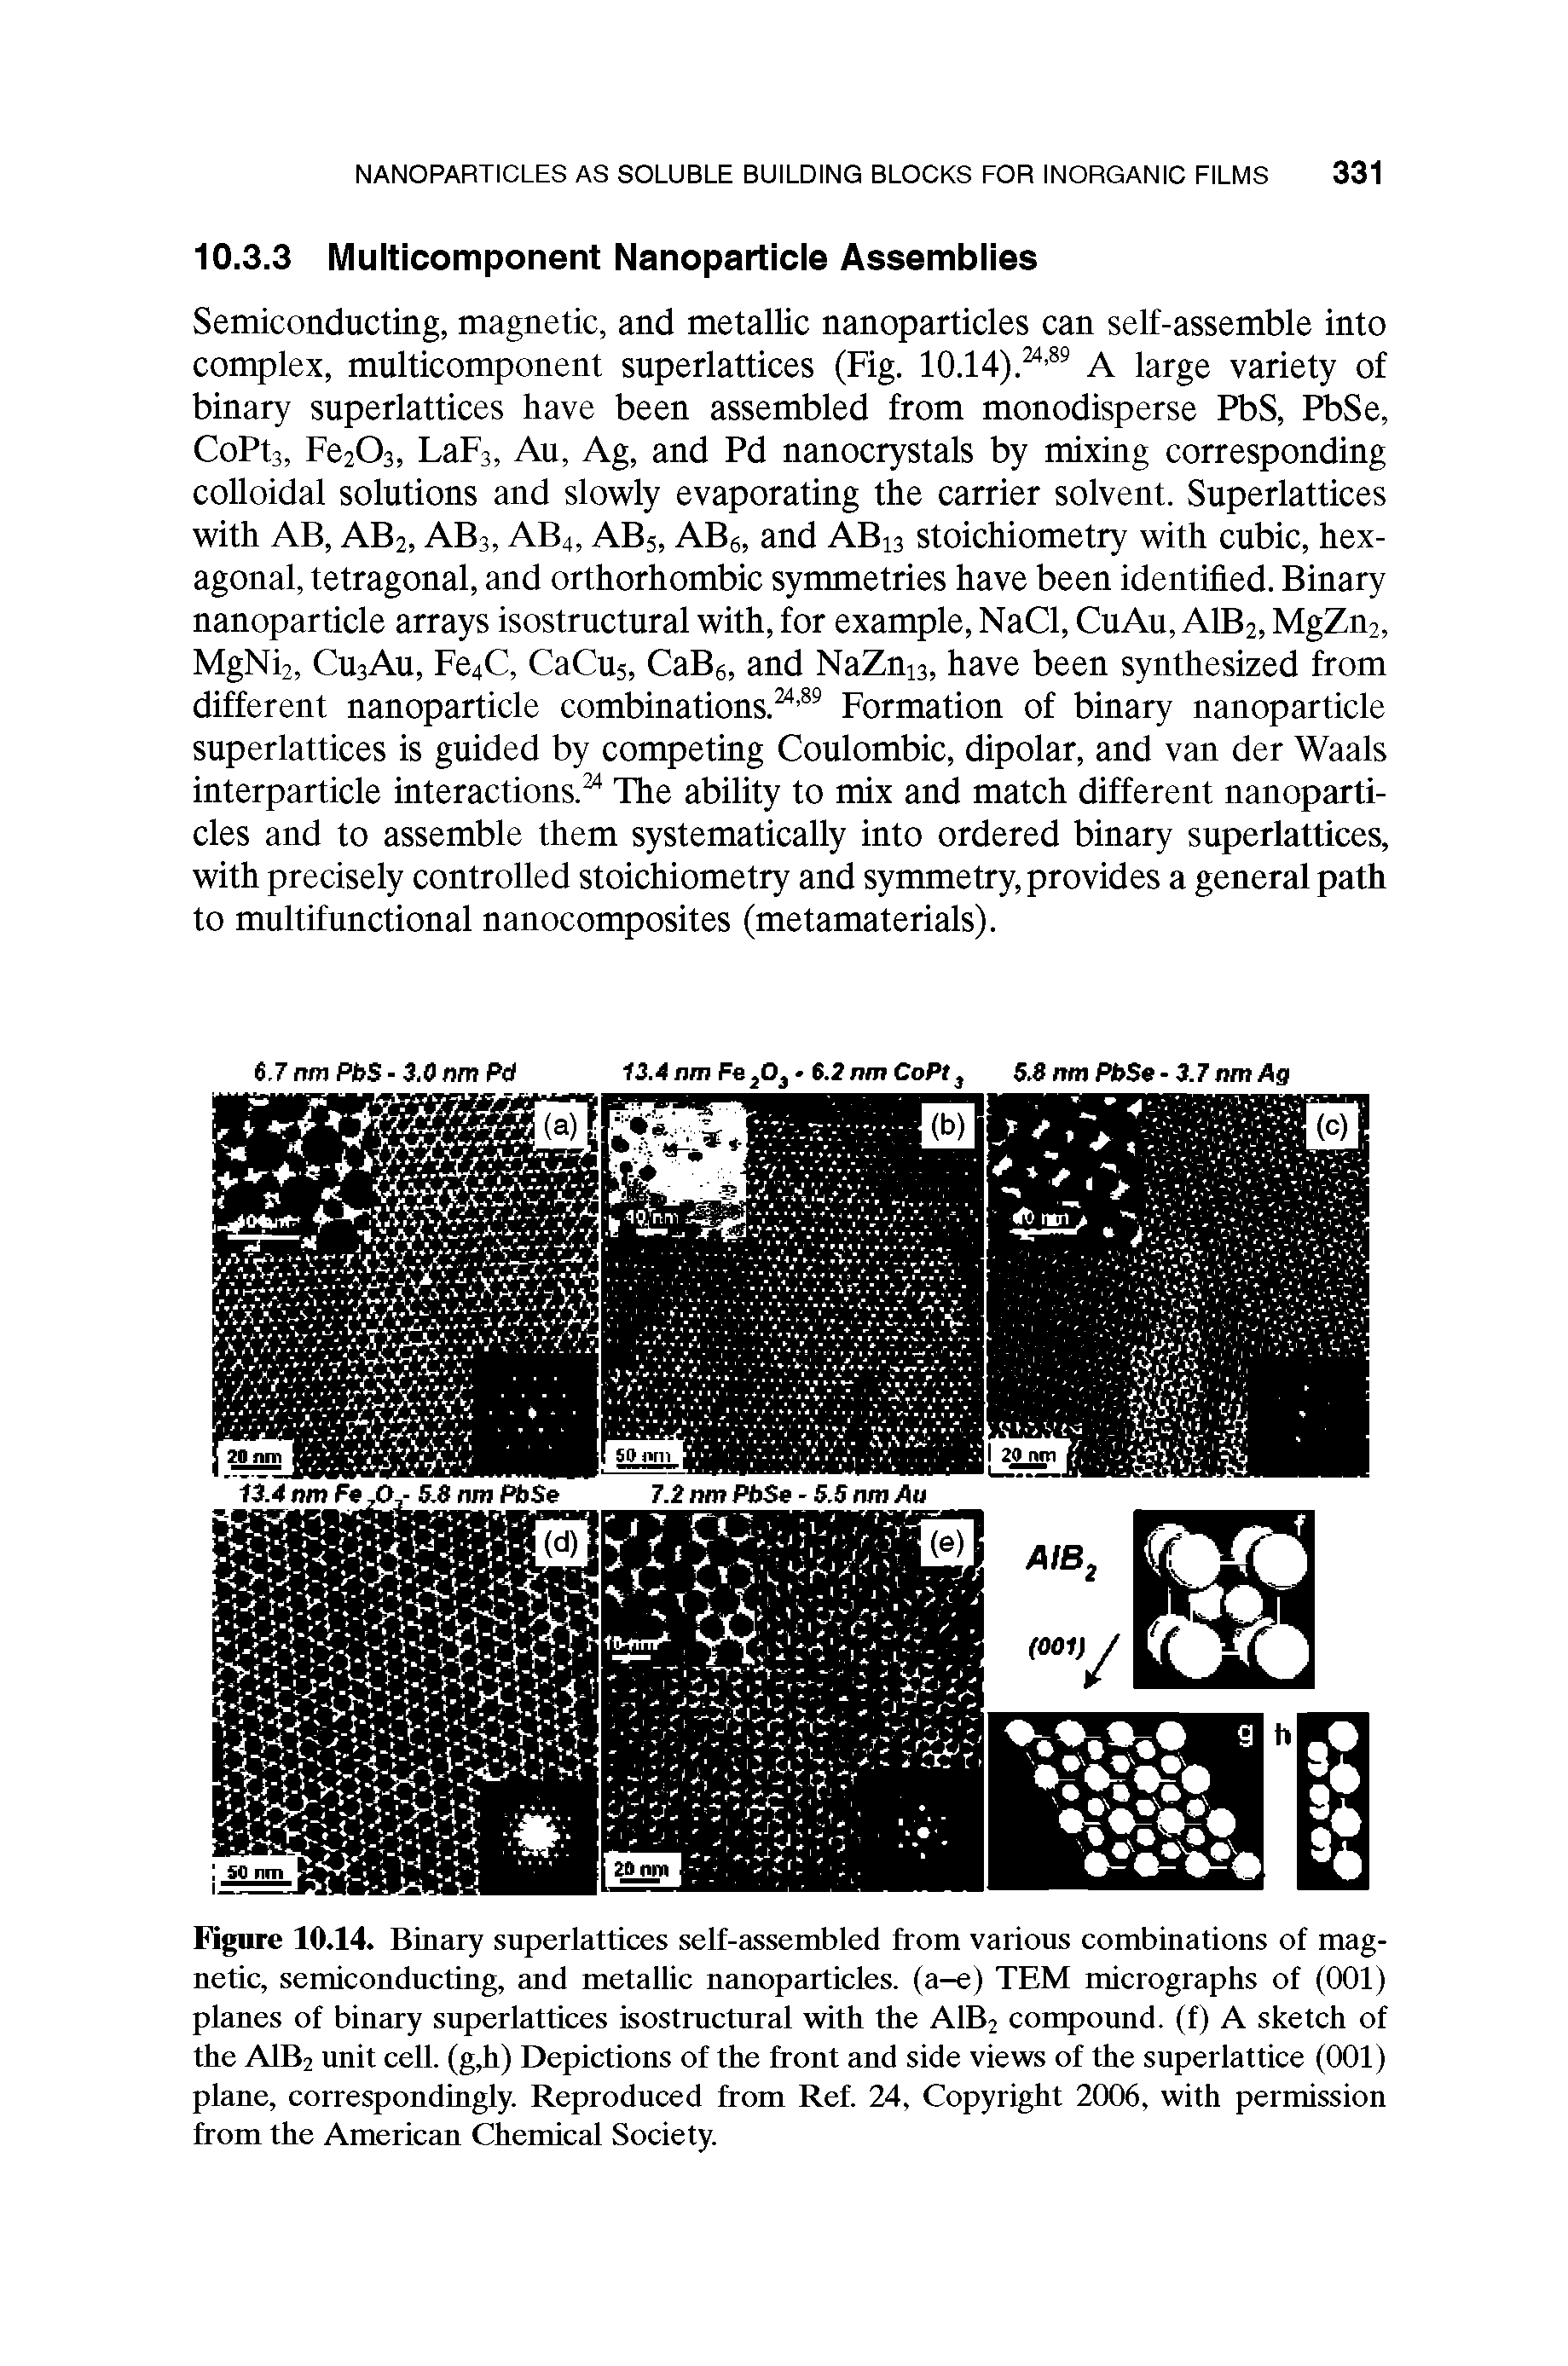 Figure 10.14. Binary superlattices self-assembled from various combinations of magnetic, semiconducting, and metallic nanoparticles, (a-e) TEM micrographs of (001) planes of binary superlattices isostructural with the A1B2 compound, (f) A sketch of the A1B2 unit cell. (g,h) Depictions of the front and side views of the superlattice (001) plane, correspondingly. Reproduced from Ref. 24, Copyright 2006, with permission from the American Chemical Society.